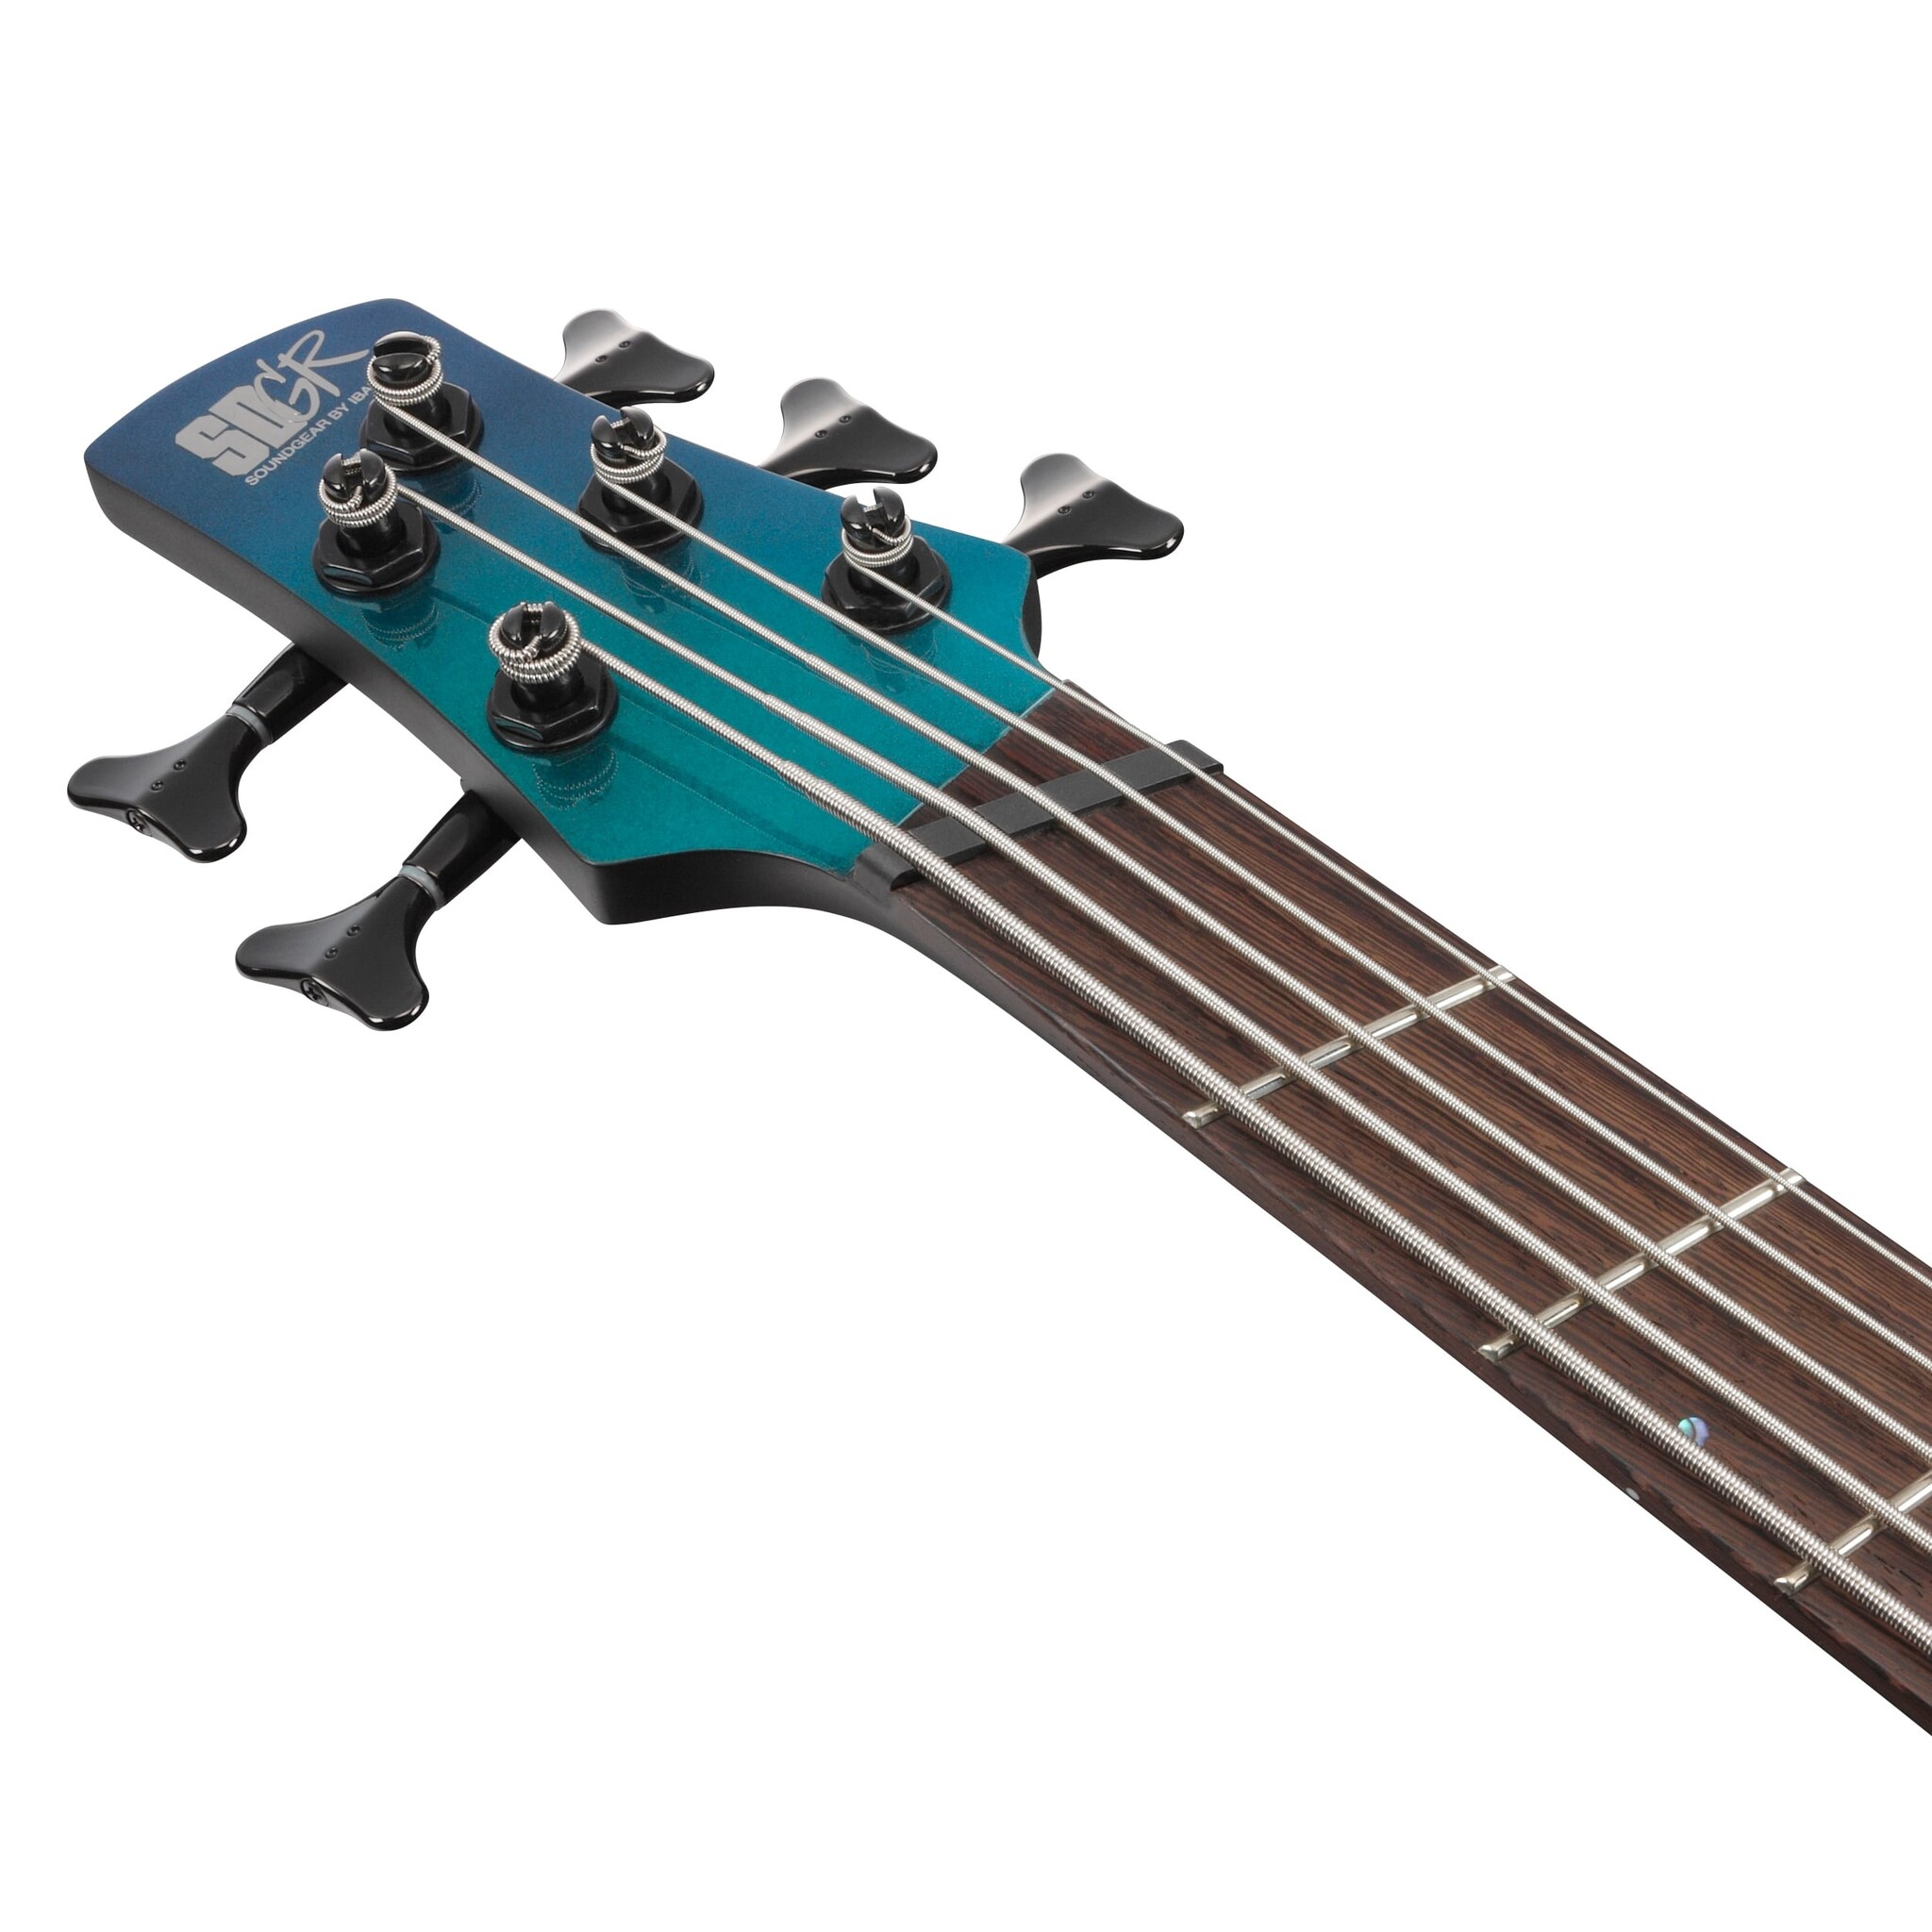 Ibanez Bass Workshop SRMS725 Multi-Scale 5-String Bass, Blue Chameleon (BCM, Polychrome), New for 2024